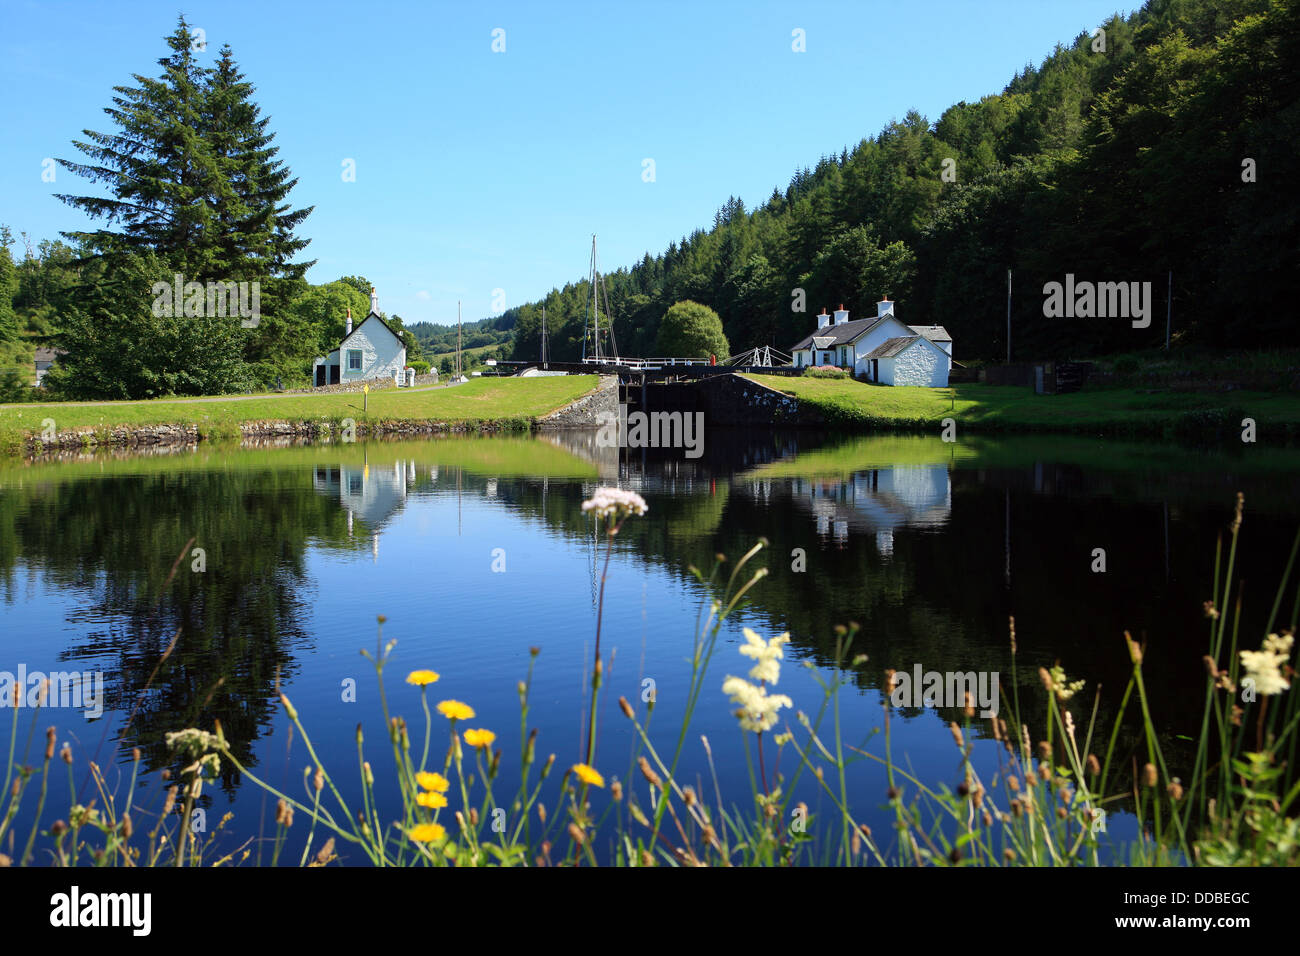 Lock keepers cottages reflected in a still Crinan Canal at Dunardry Bridge in Argyll, Scotland Stock Photo